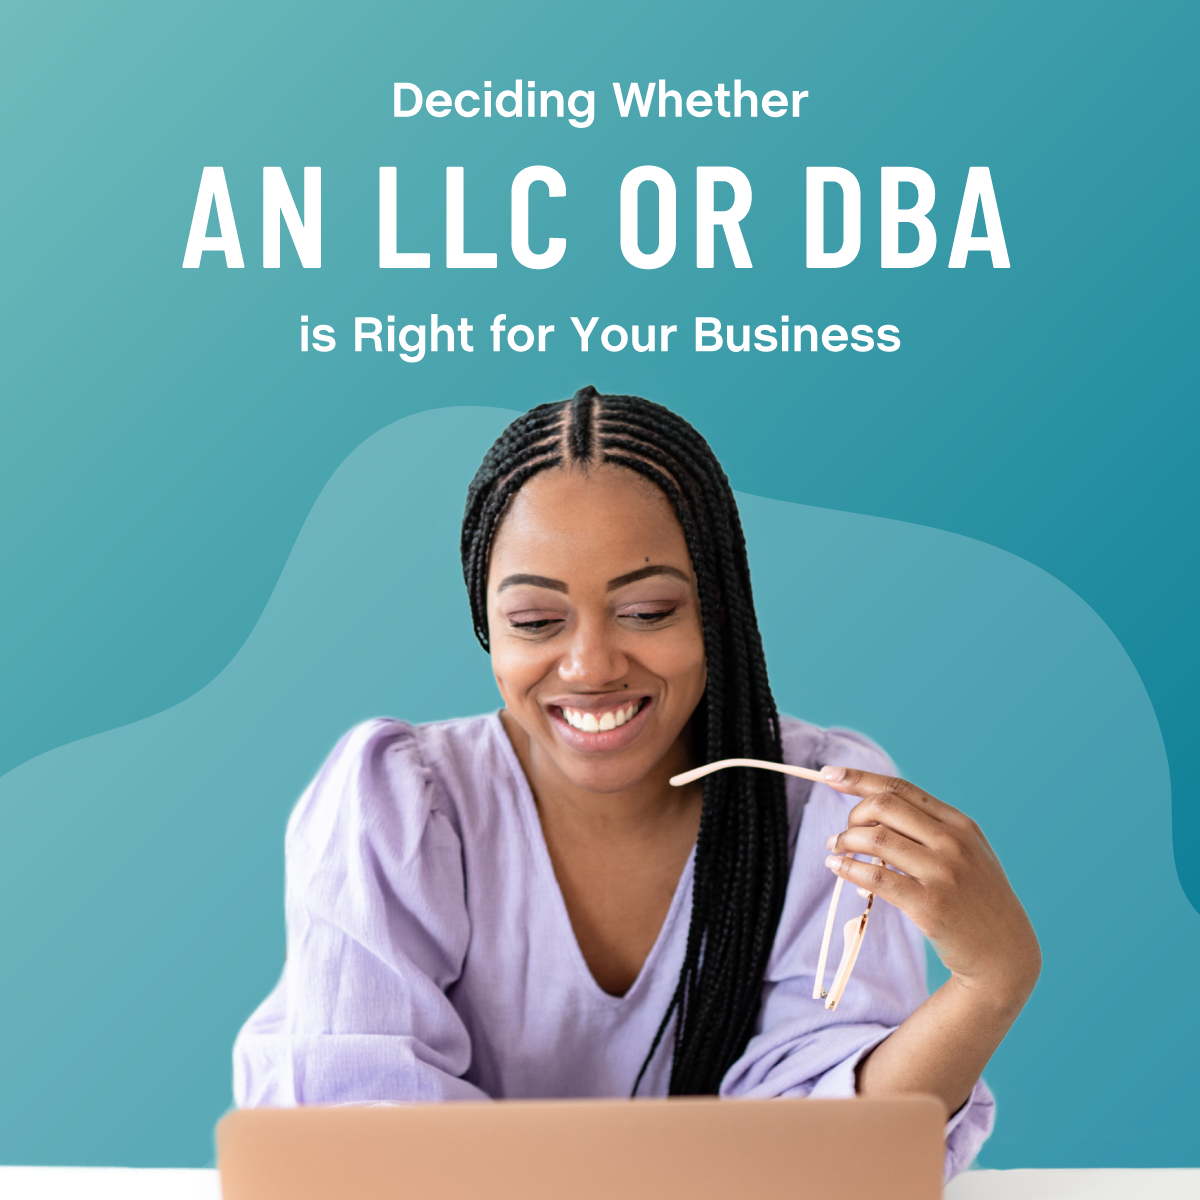 Deciding Whether an LLC or DBA is Right for Your Business